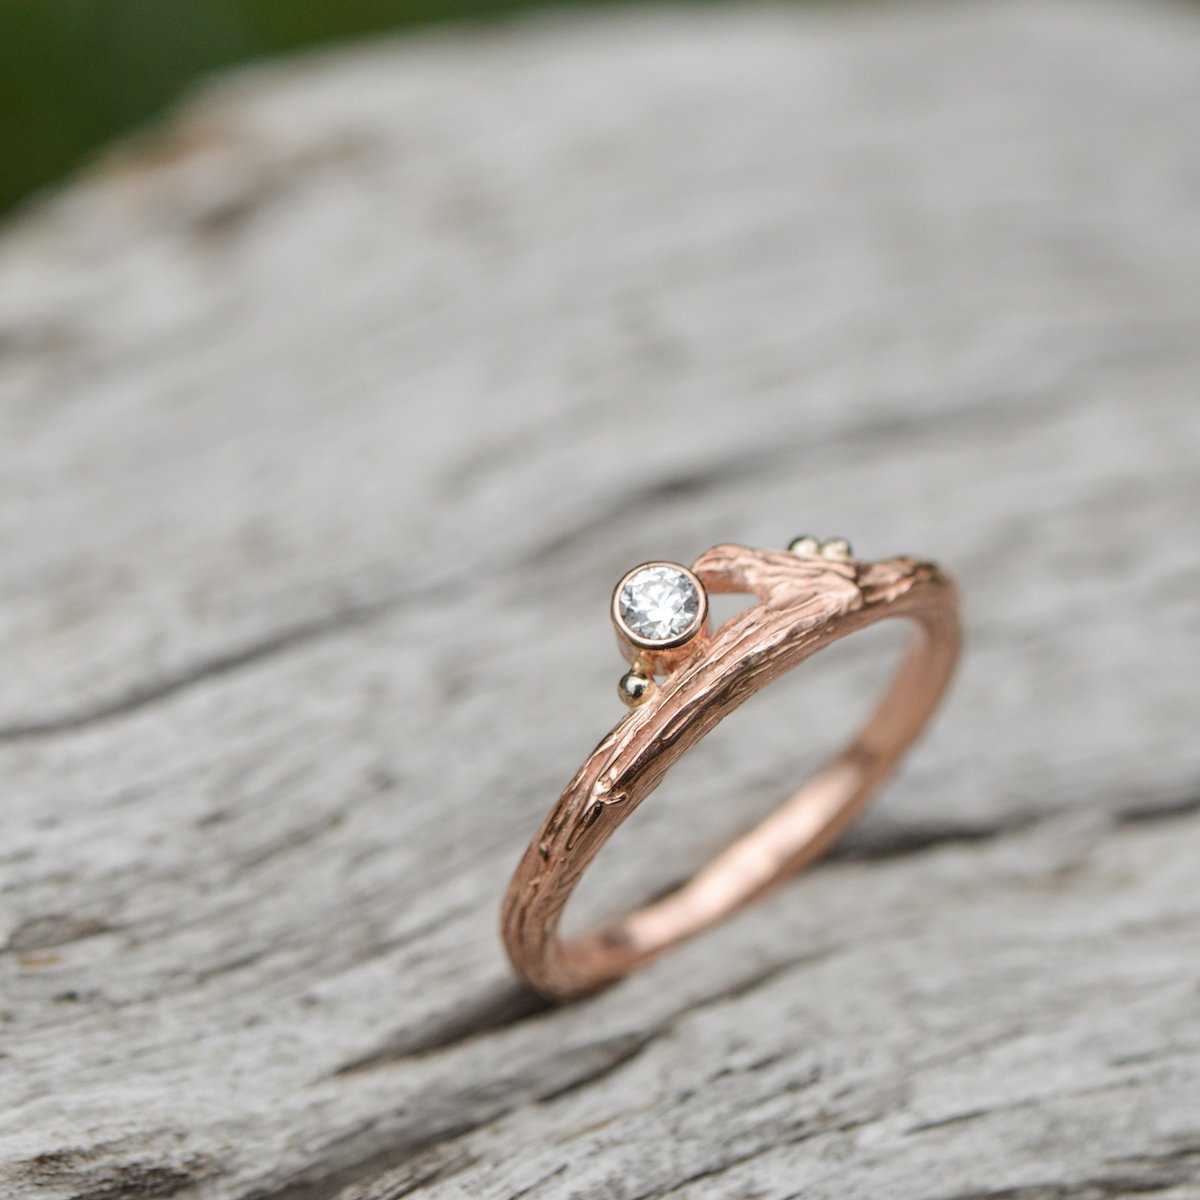 Rose Gold Diamond & Roses Twig Ring - your choice of stone - Wedding Ring  Select Size / Recycled Diamond  4 / Recycled Diamond 3714 - handmade by Beth Millner Jewelry